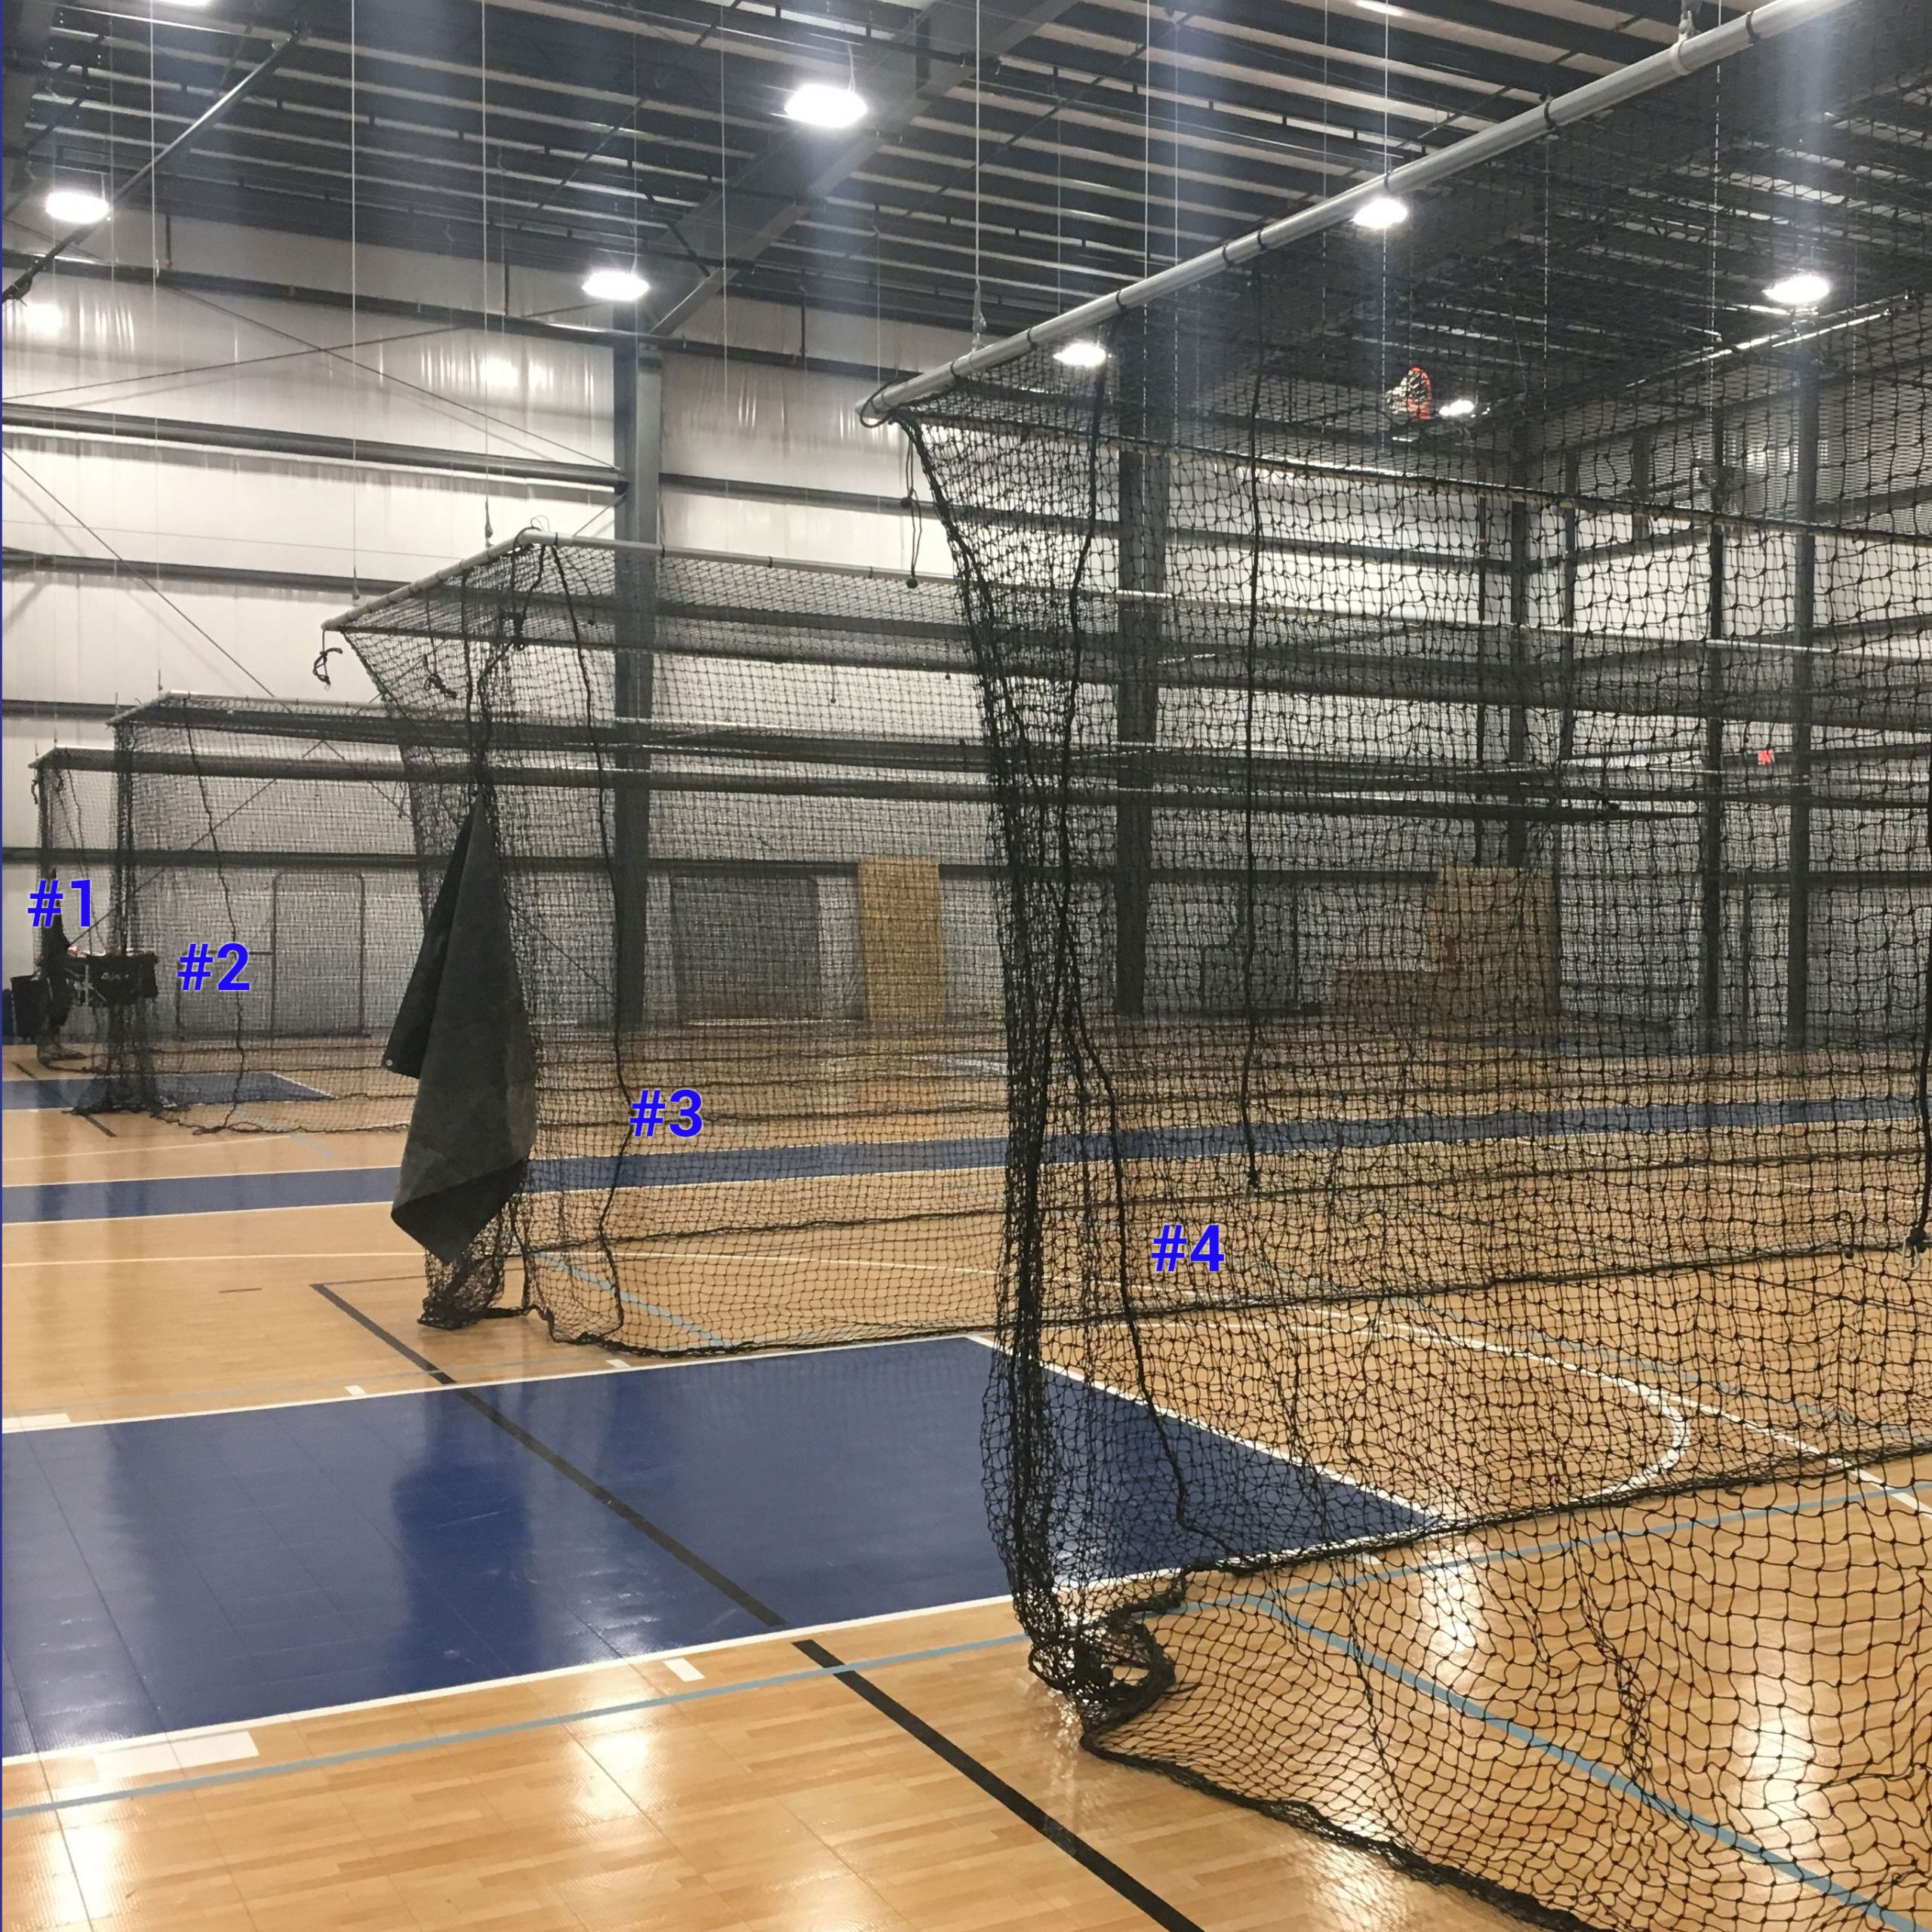 Batting baseball softball center cage cages pitching tilton sports screen screens